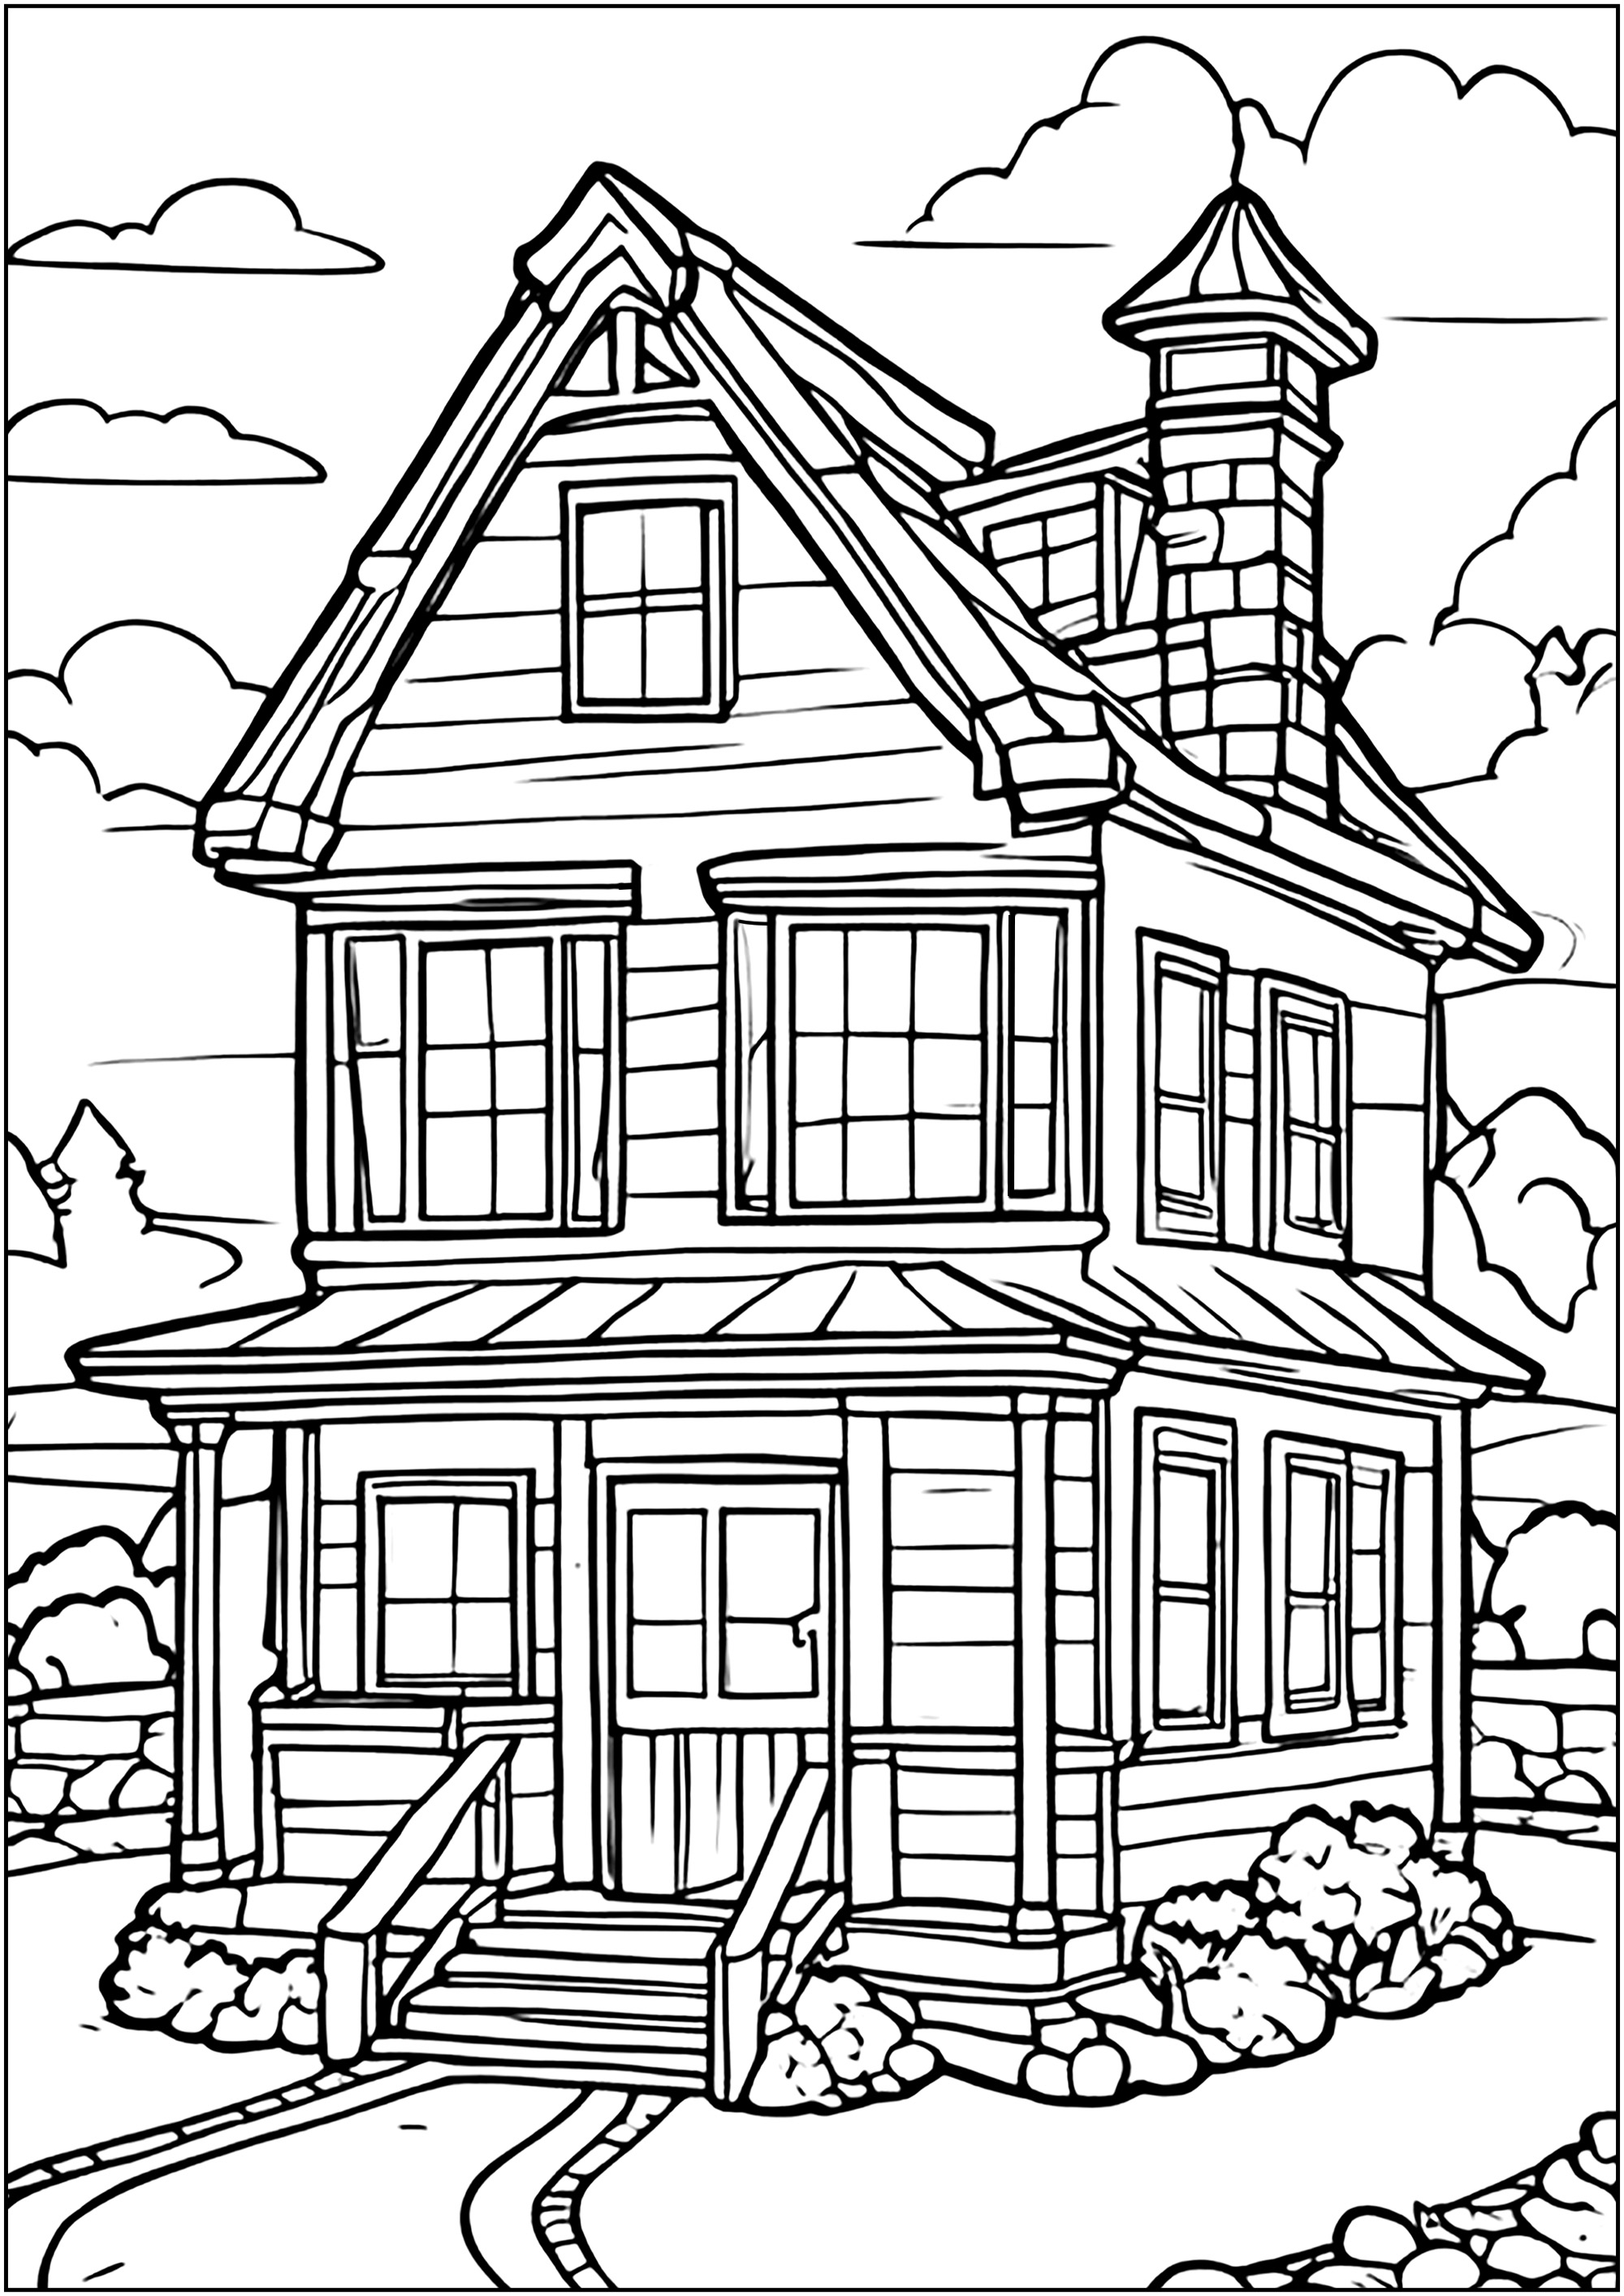 Coloring page : Architecture